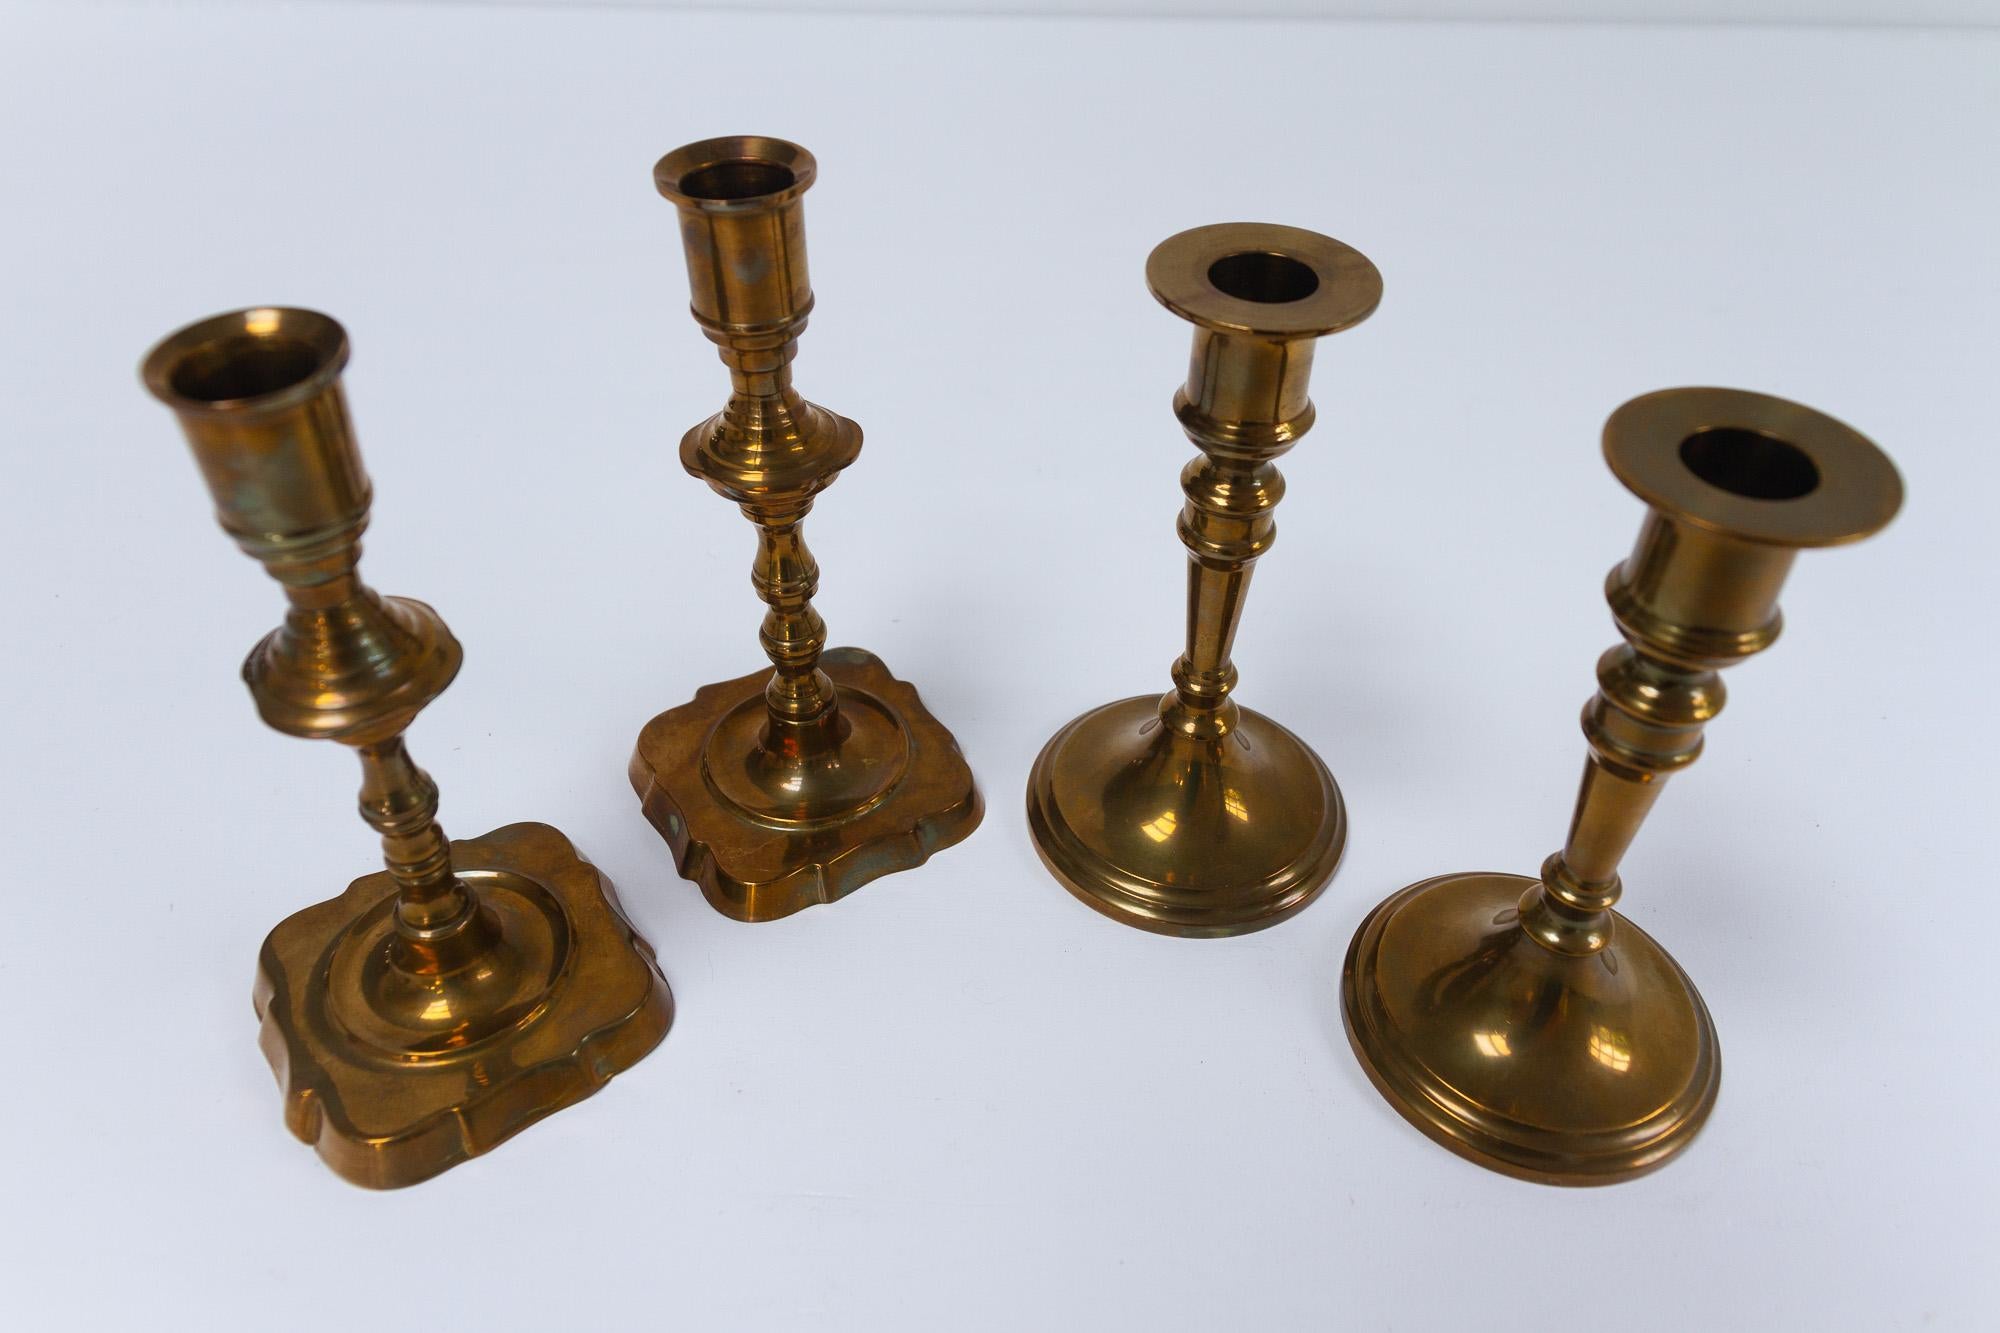 Empire Vintage Danish Malm Candle Holders, 1950s. Set of 4. For Sale